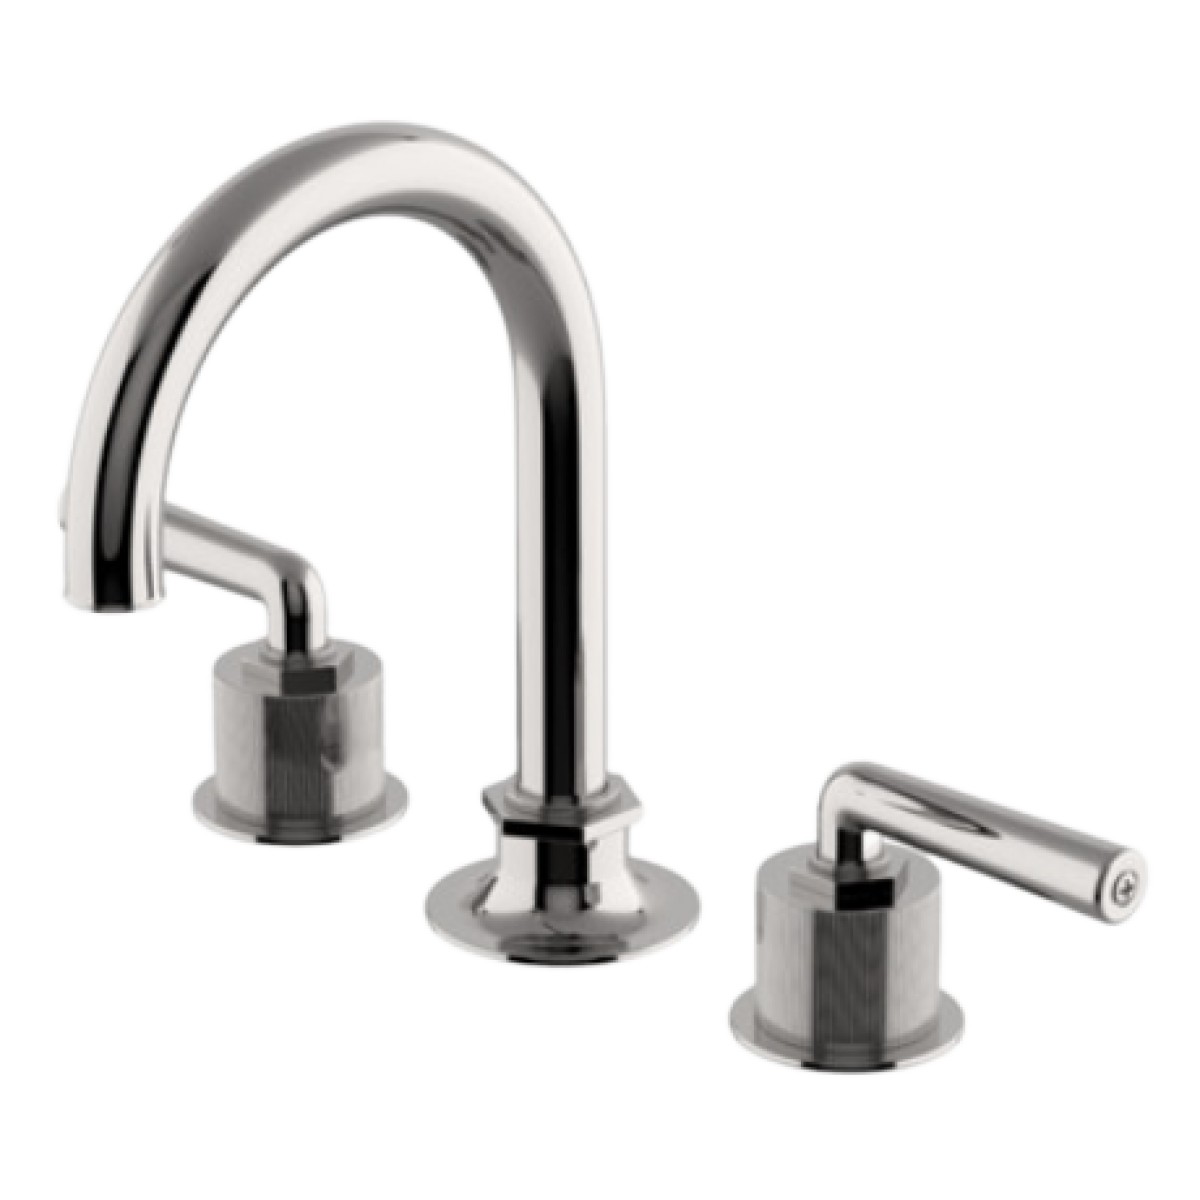 Henry Gooseneck Three Hole Deck Mounted Lavatory Faucet with Coin Edge Cylinders and Metal Lever Handles